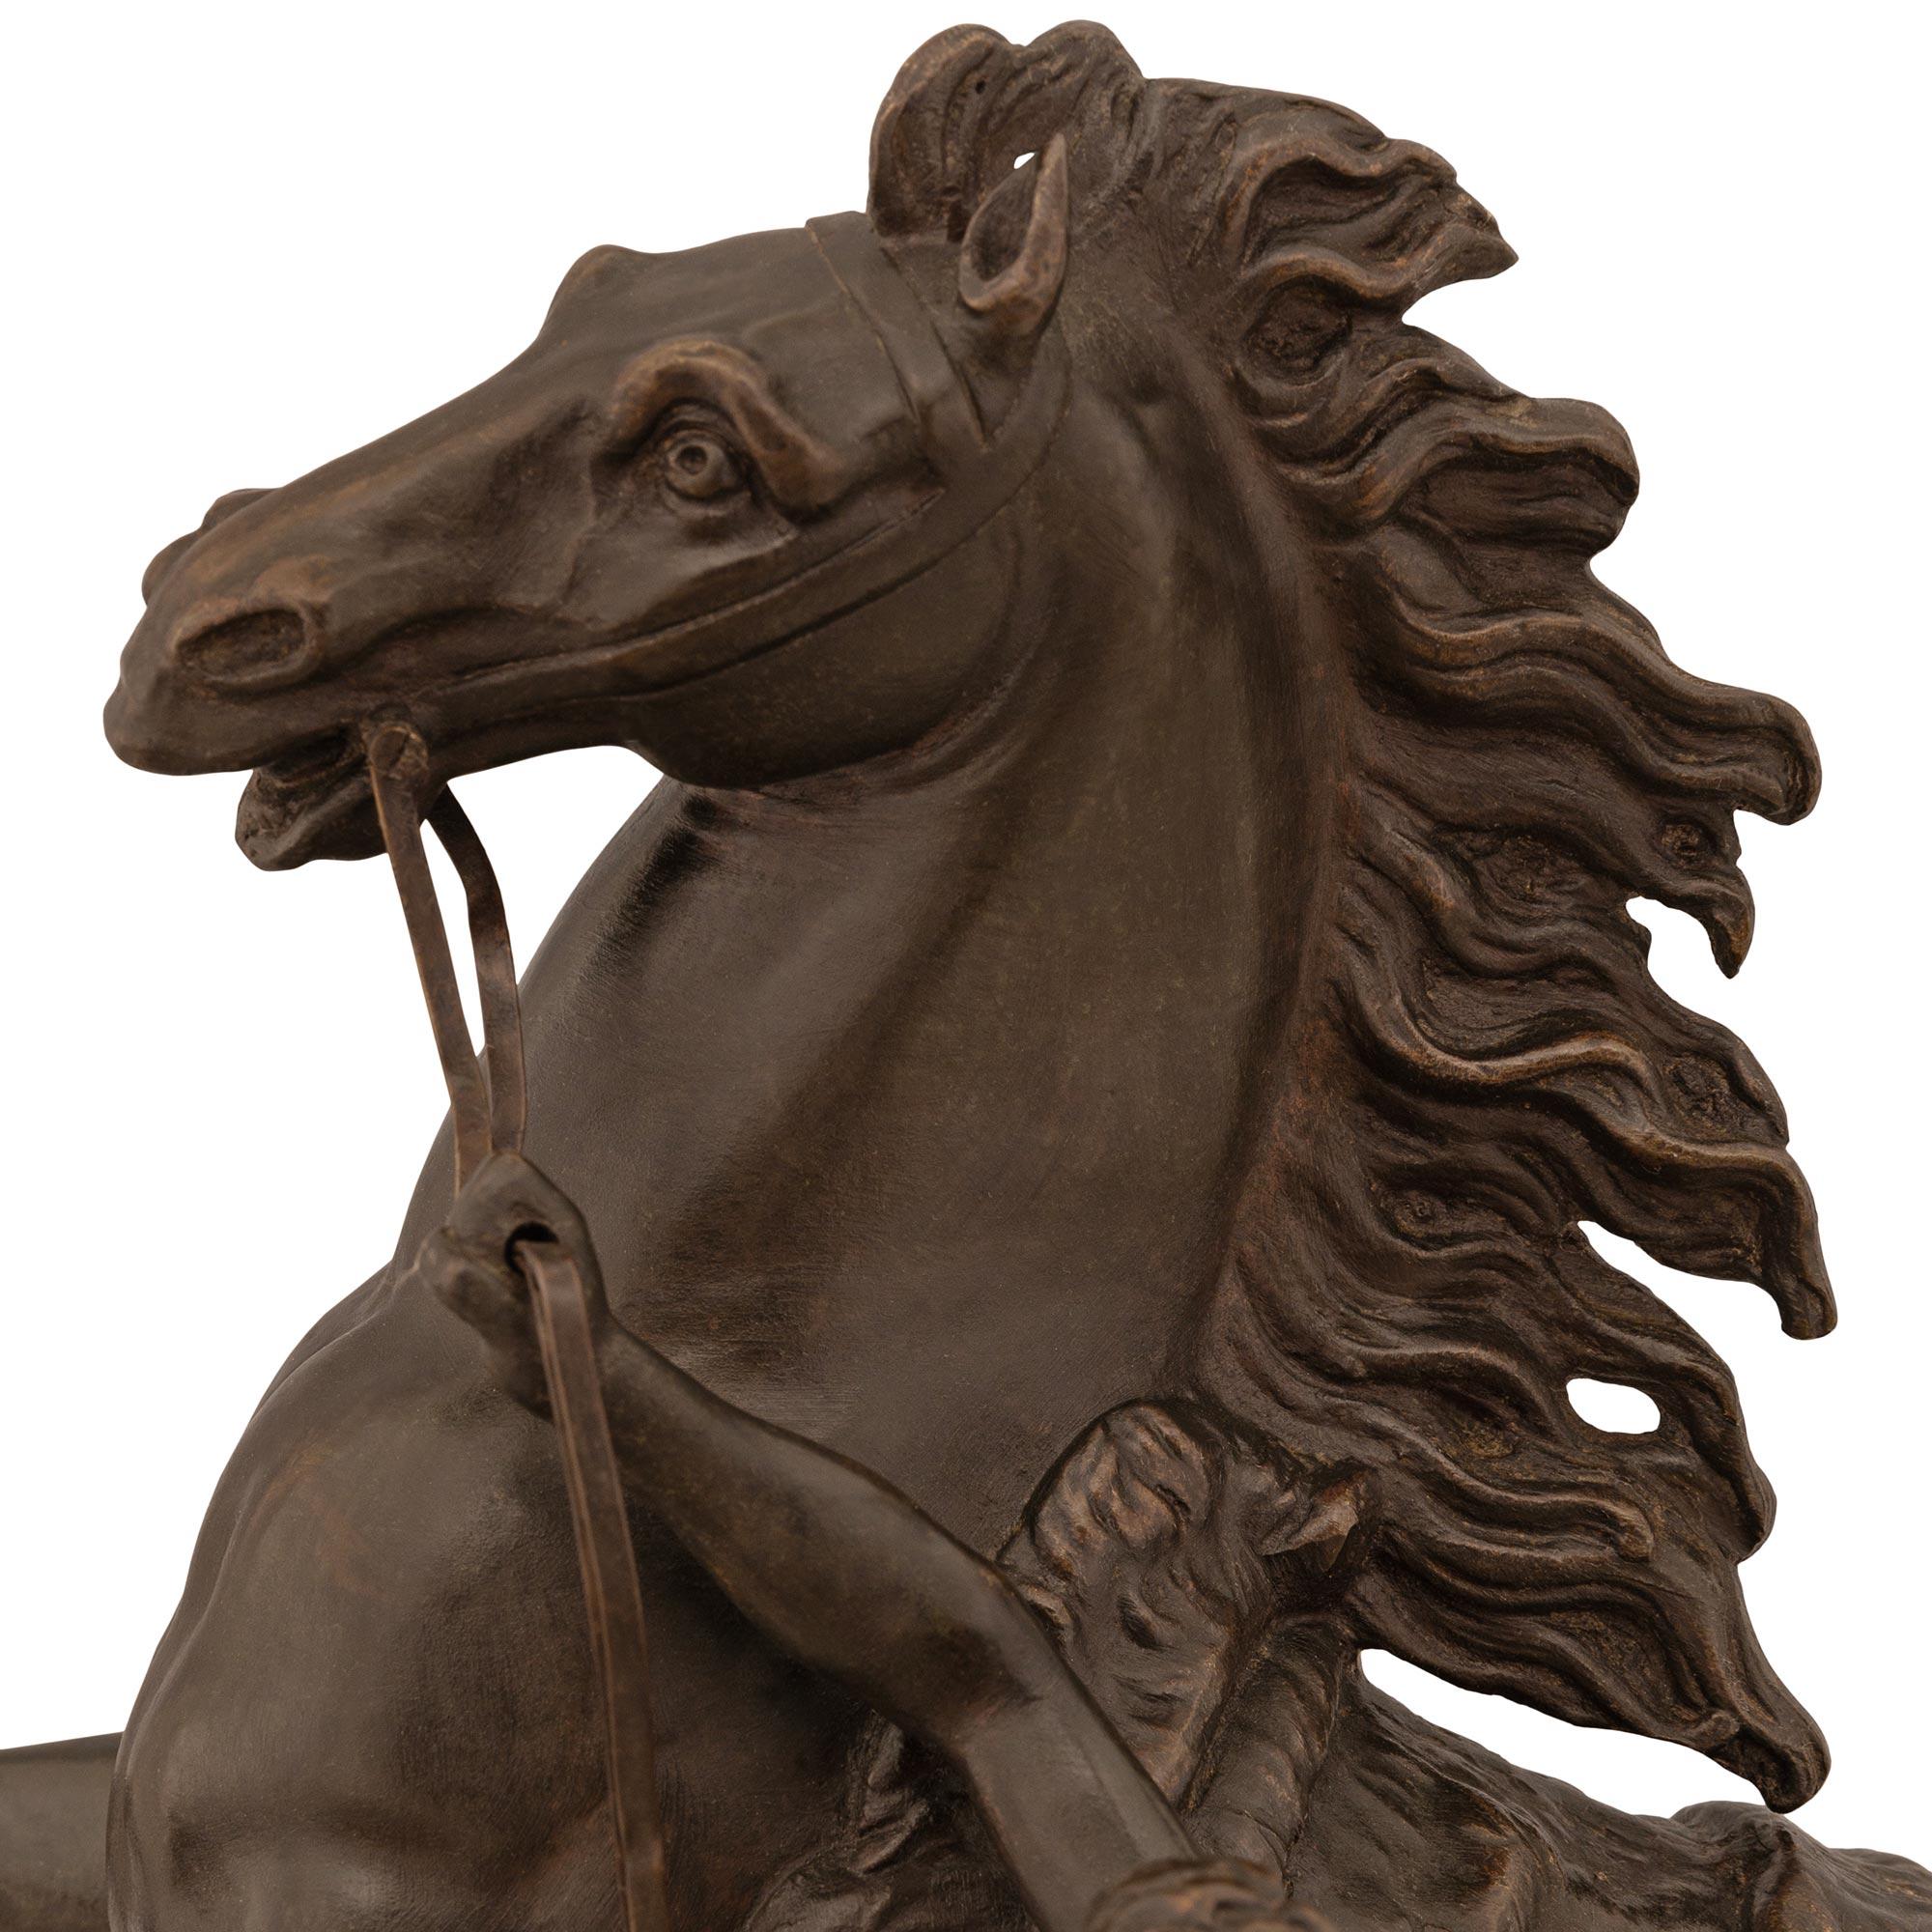 A handsome French 19th century patinated Bronze statue of a horse and groom, modeled after the horses of Marly. The spectacular horse is draped in a saddle blanket and displays a wonderful flowing mane and tail while rearing and being handled by a